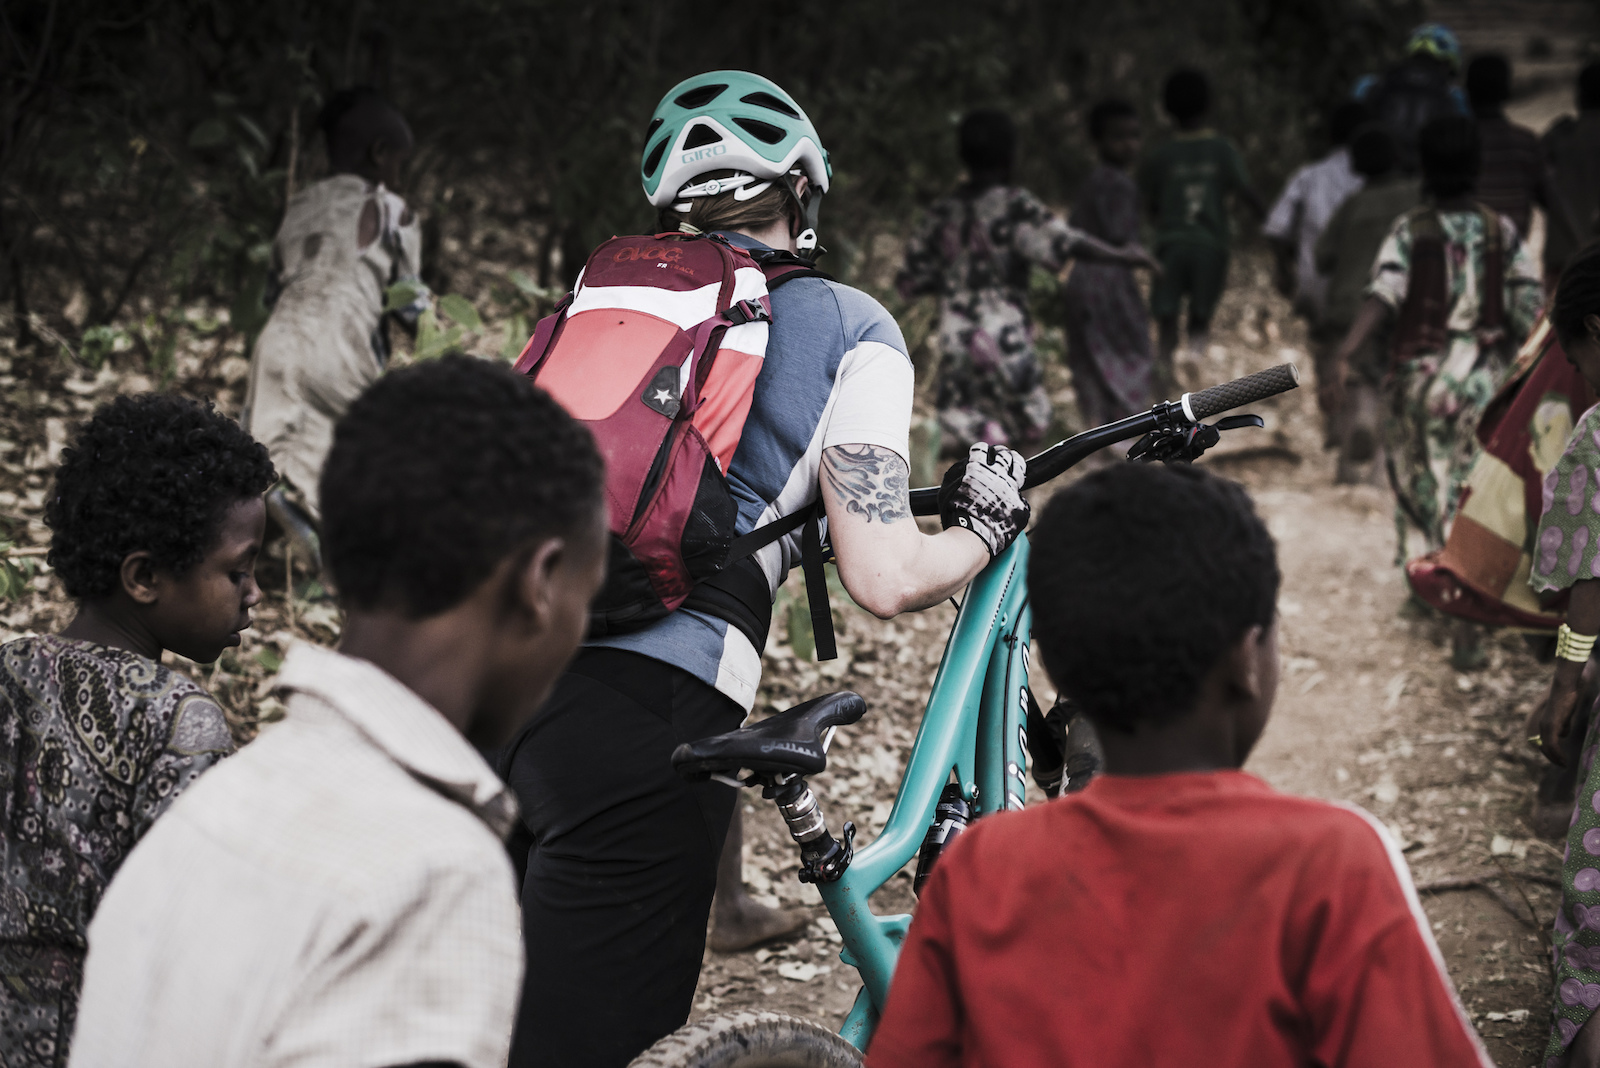 Images by Dan Milner from Giro s trip to Ethiopia.